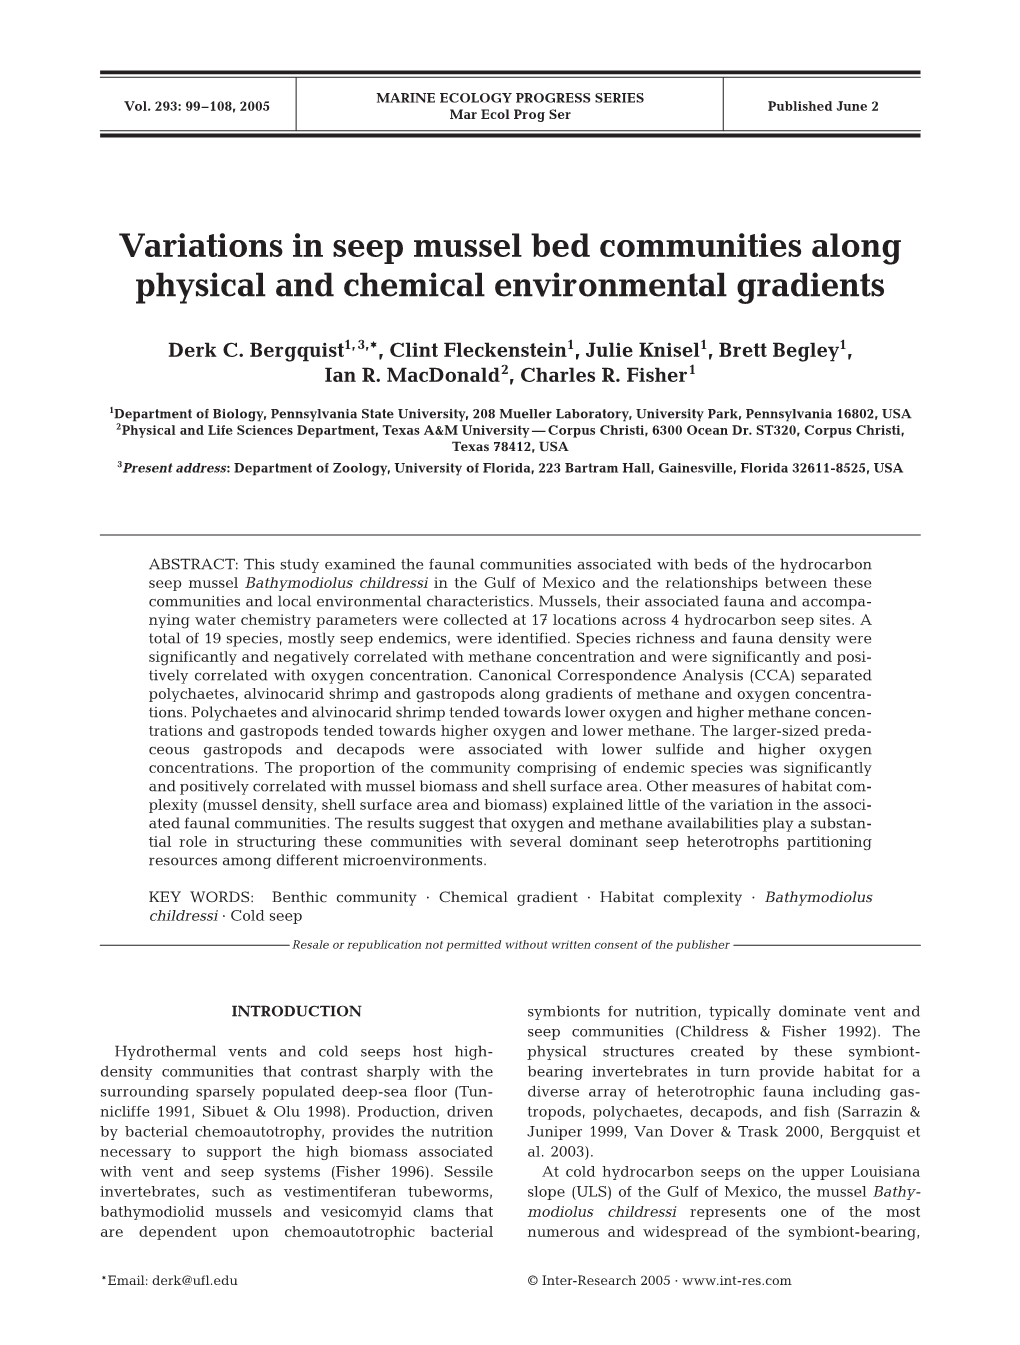 Variations in Seep Mussel Bed Communities Along Physical and Chemical Environmental Gradients